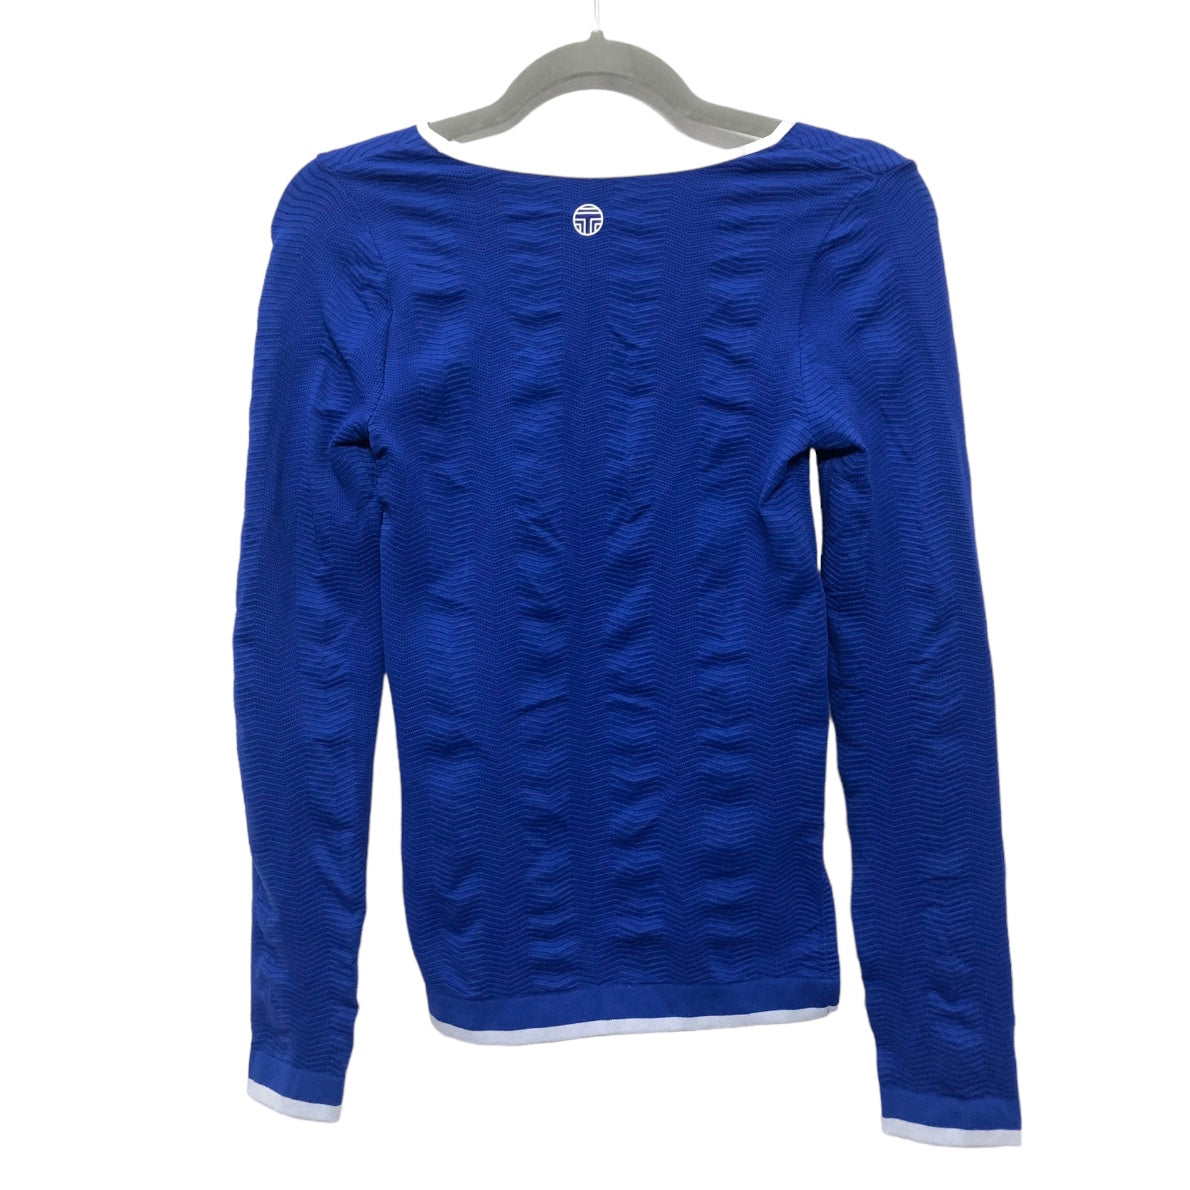 Athletic Top Long Sleeve Crewneck By Tory Burch  Size: S